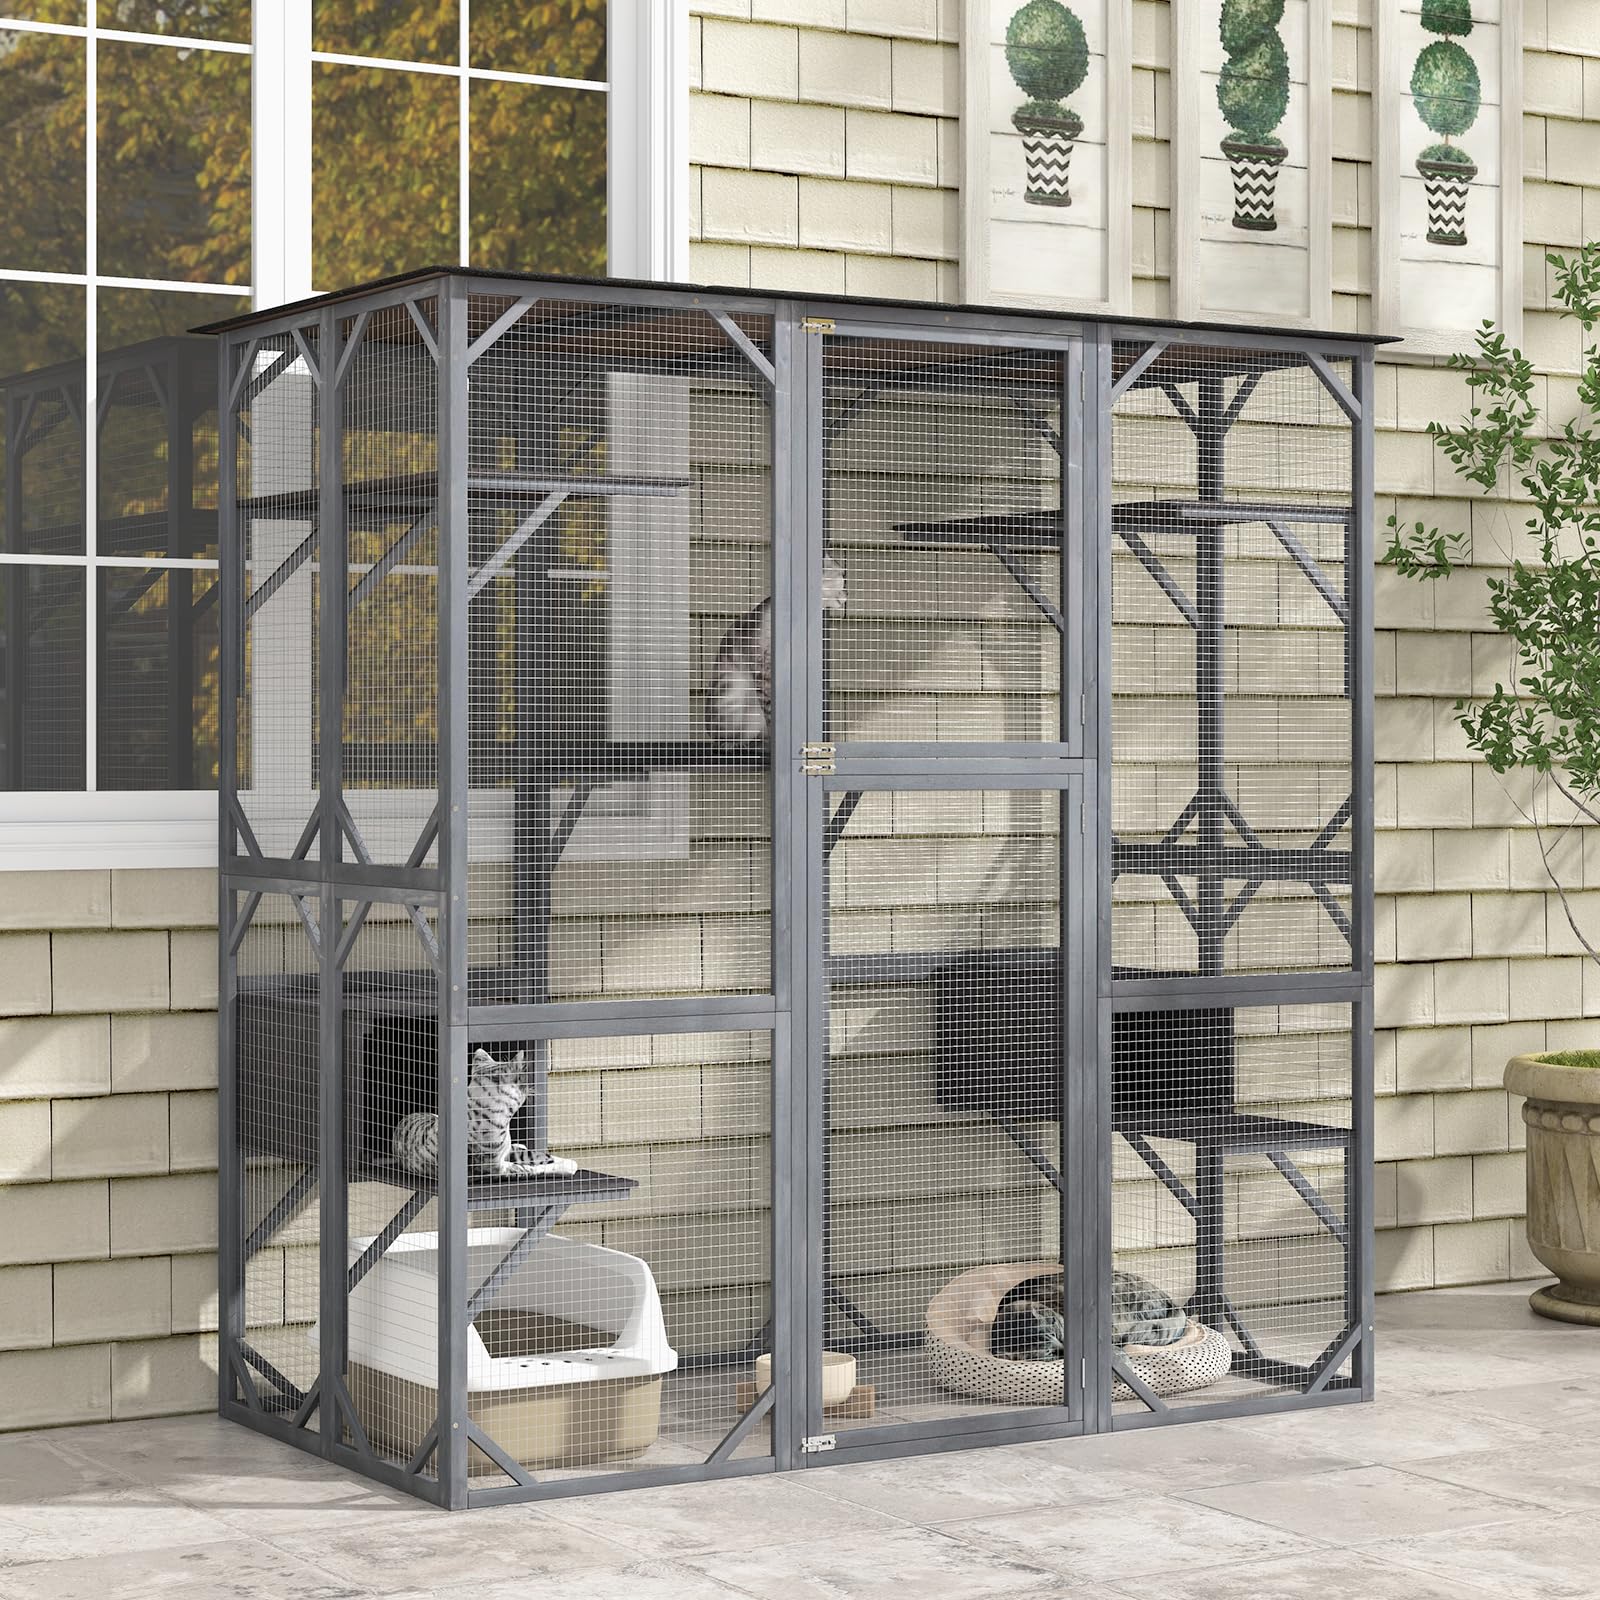 Tangkula Catio Outdoor Cat Enclosure Large, 71 Inch Outdoor Cat House Weatherproof with Asphalt Roof